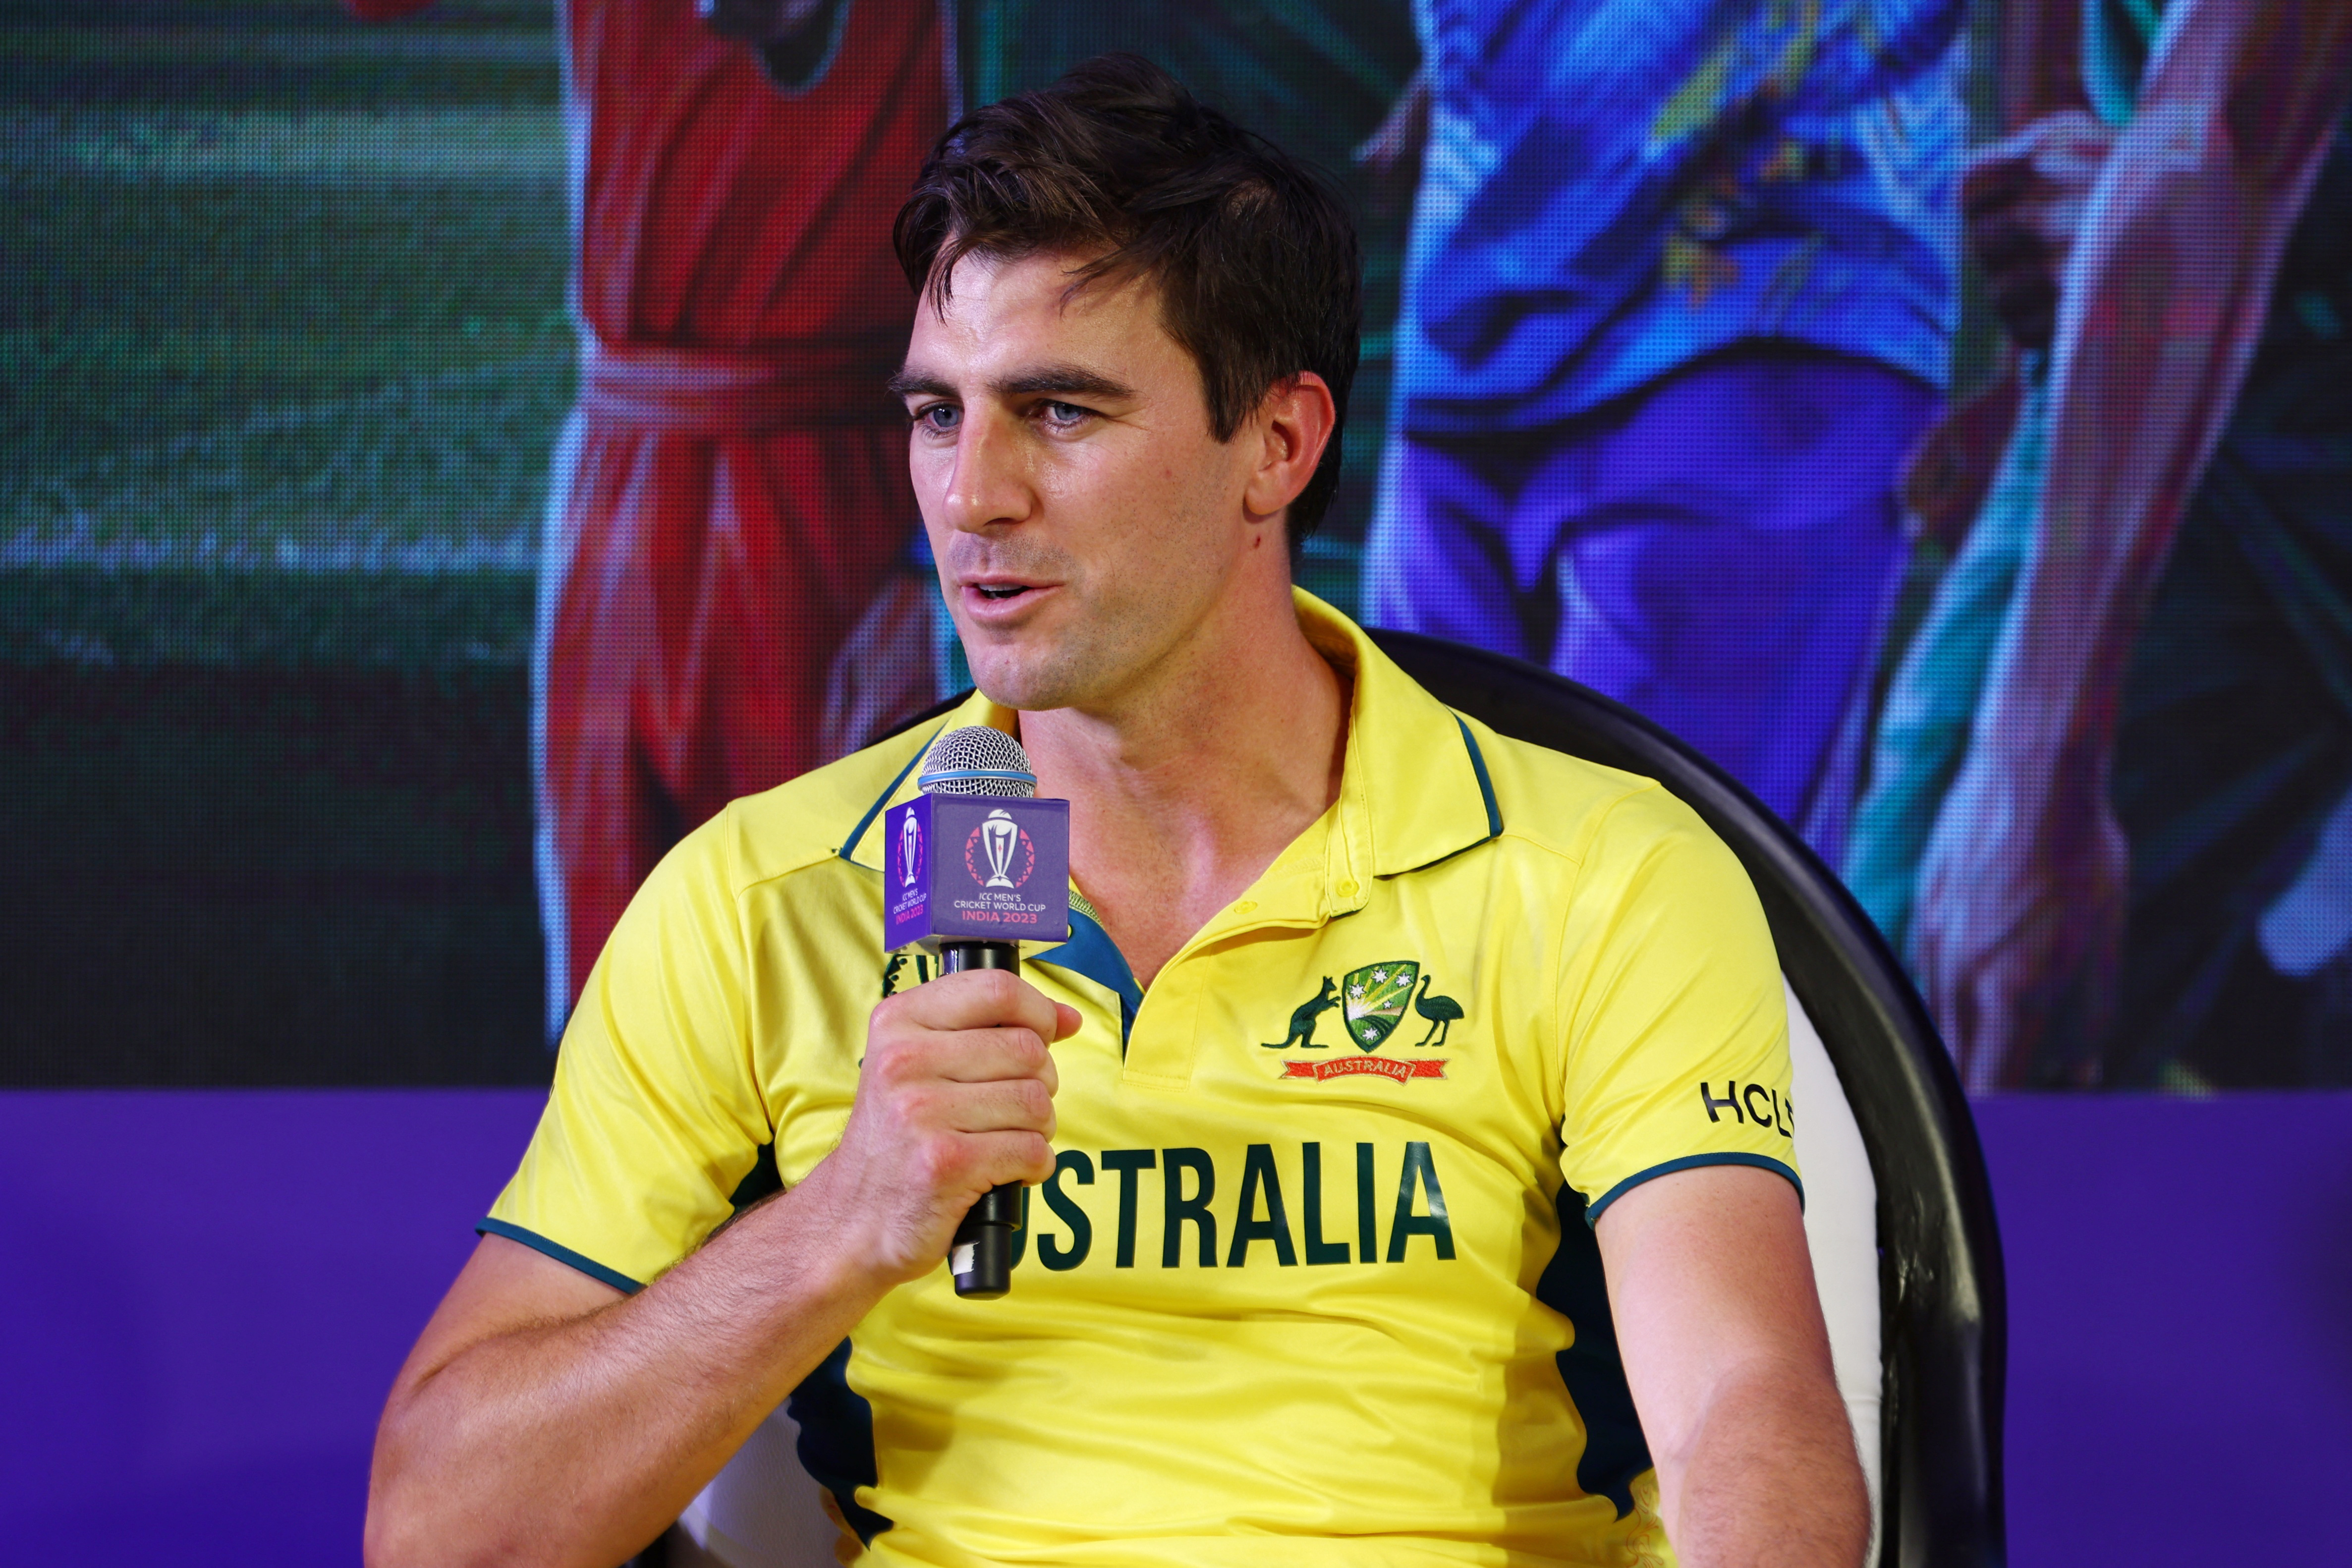 Cricket Australia Launches New Jersey For ICC Men's T20 World Cup